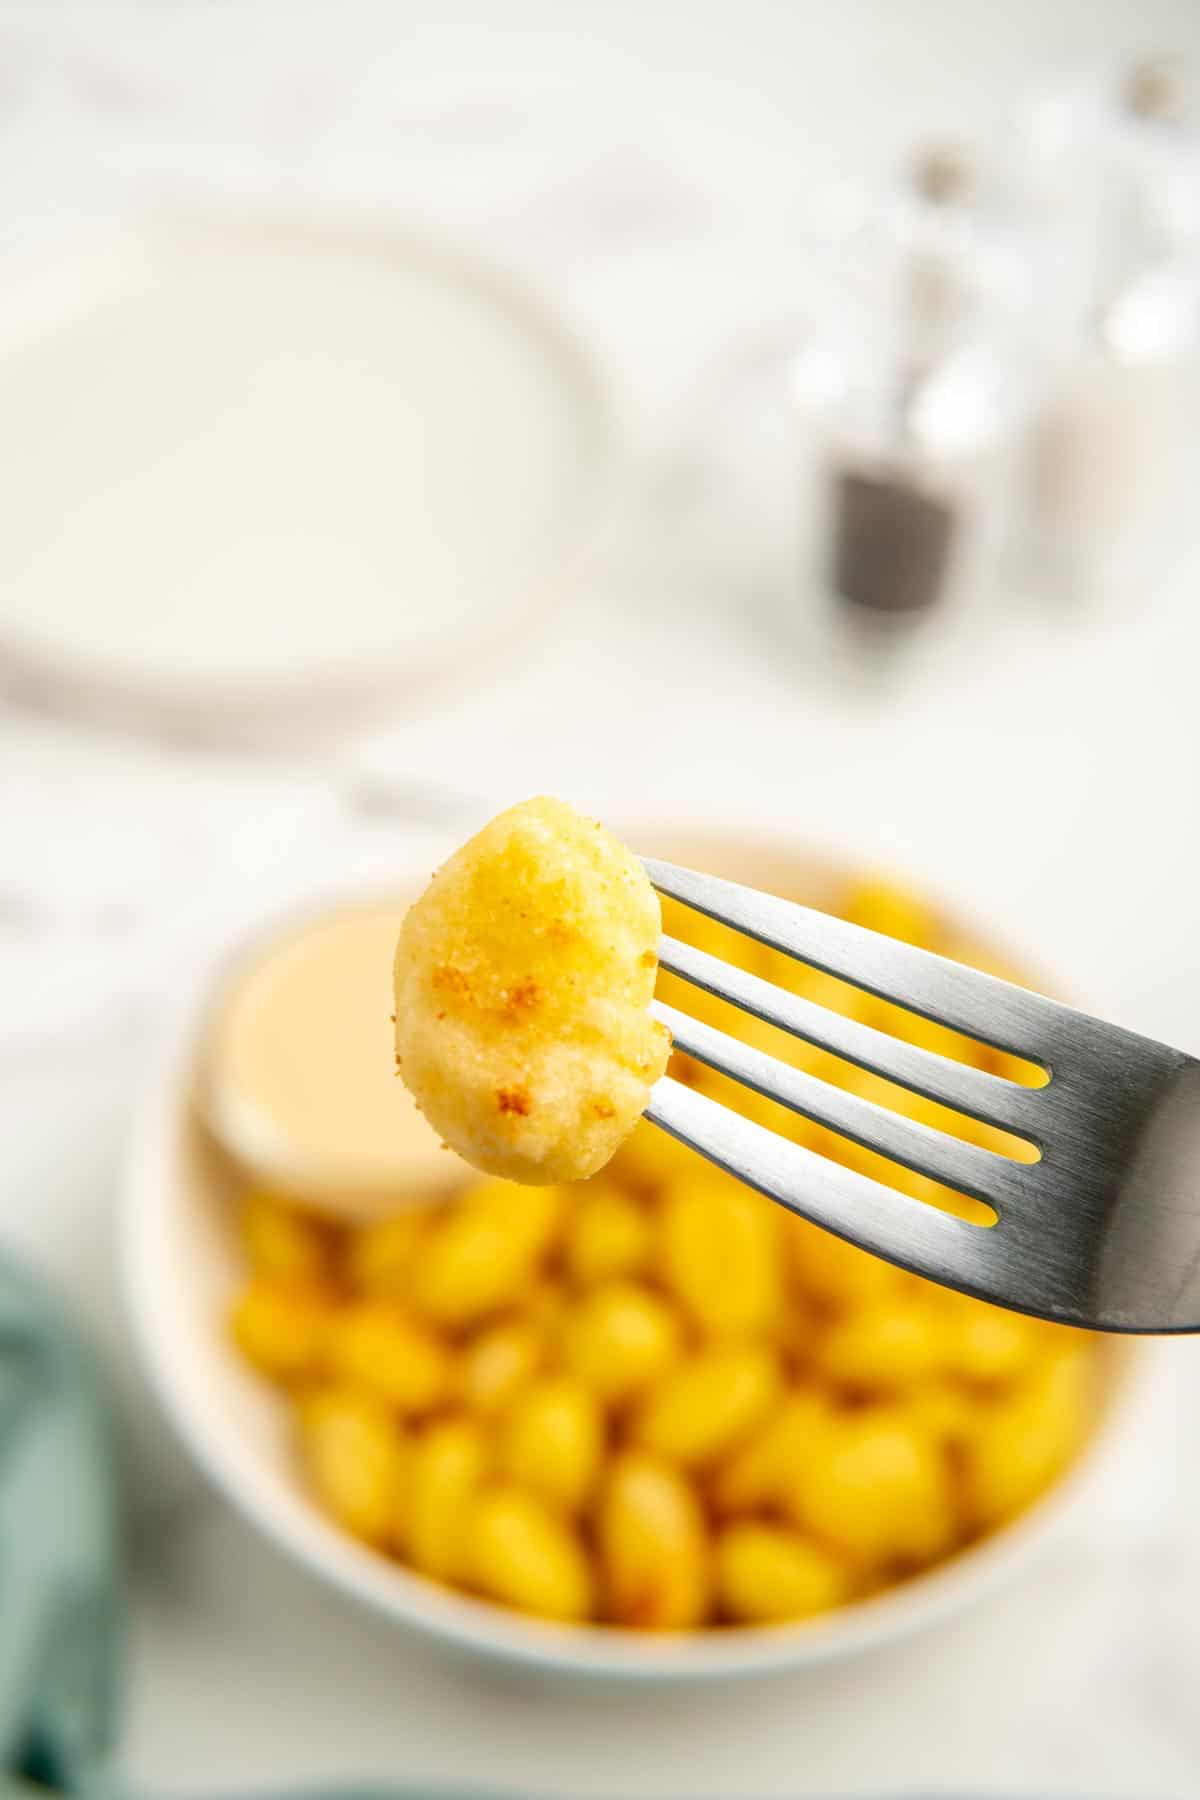 A piece of air fryer gnocchi on a fork in front of a bowl of air fryer gnocchi.